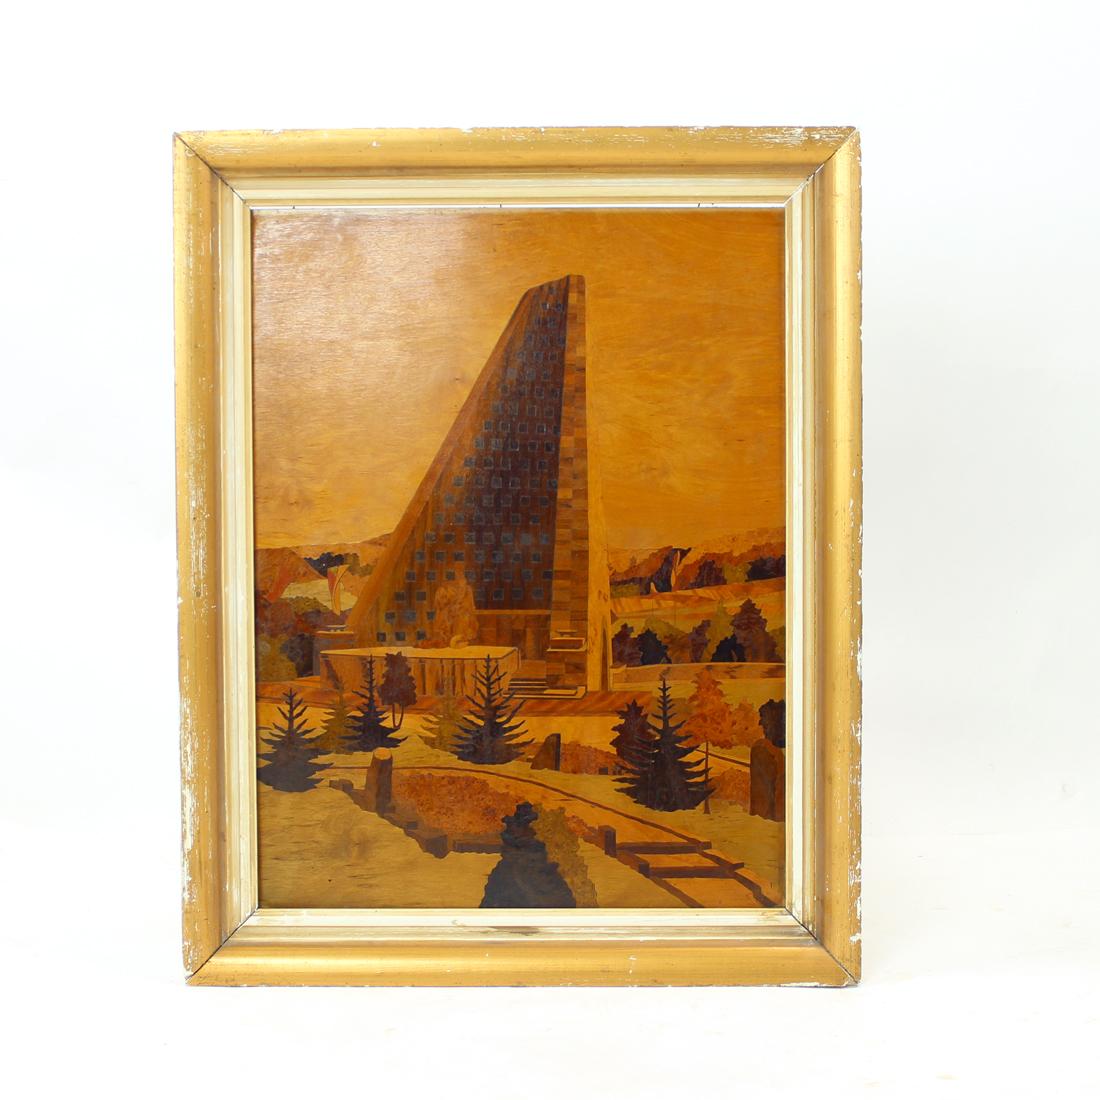 Unique framed art work produced in Czechoslovakia in 1950s. The art is completely made of wood veneer. It is inlaid in tiny pieces to create one beautiful piece of finish. The artist used the wood veneer as a paint color. Different colors are